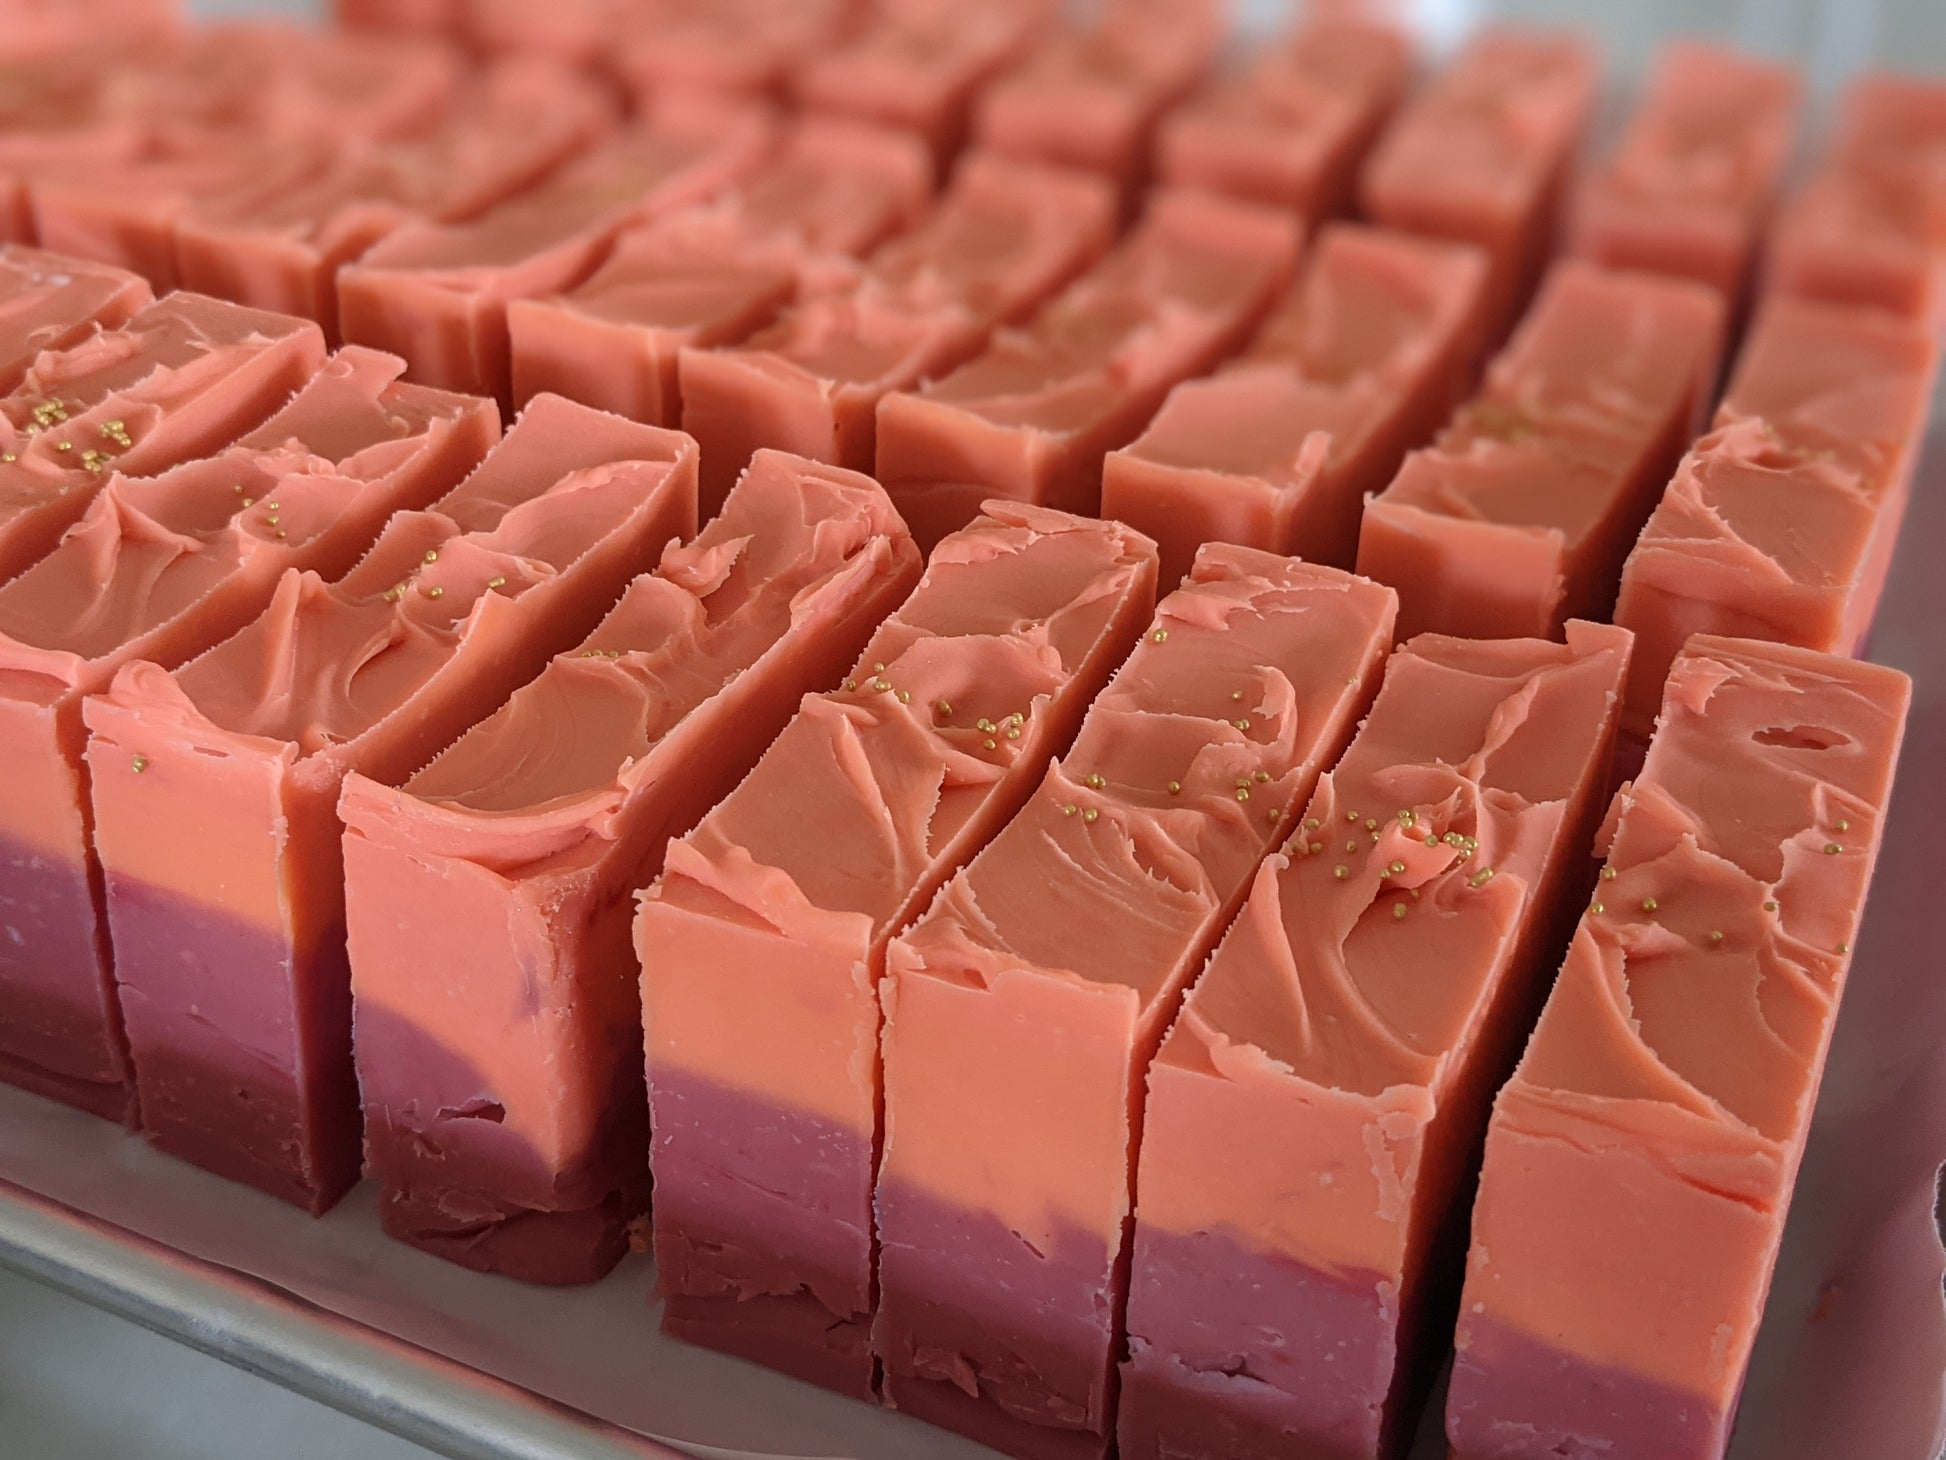 Mango Papaya vegan handcrafted soaps. Our handcrafted vegan luxurious soaps are made locally here in San Diego in small batches.  Highest quality ingredients used to give the best lather, nourishment, and cleansing experience.  We use different type of clays in each soap including rhasoul clay, kaolin clay, rose clay, red Moroccan clay, French green clay which add to the beautiful washing experience using our soaps. Great for gifting for birthdays, celebrations, bridal showers or self care gift to yourself!